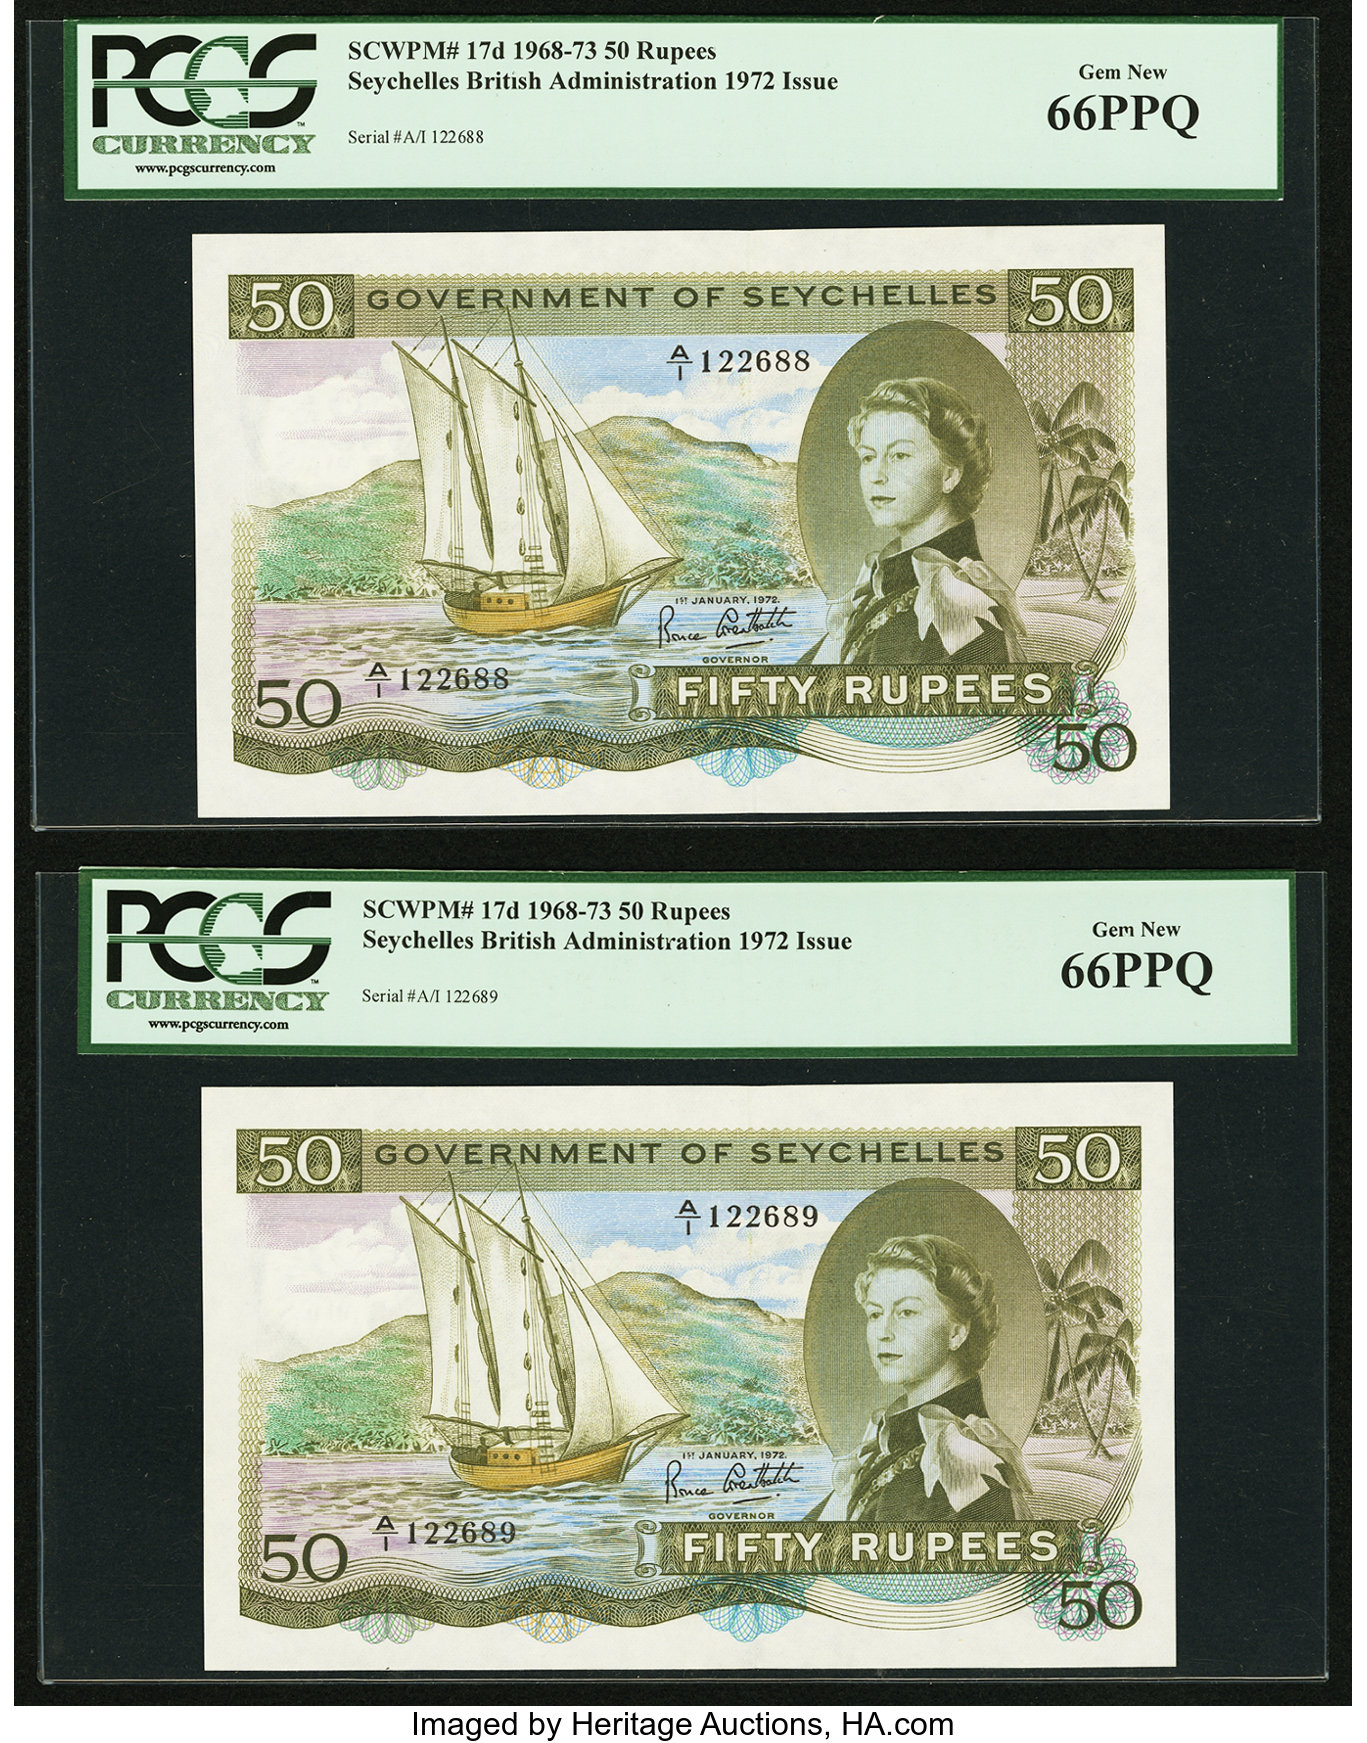 Government of Seychelles 50 rupees B124t,P17 Bright green 